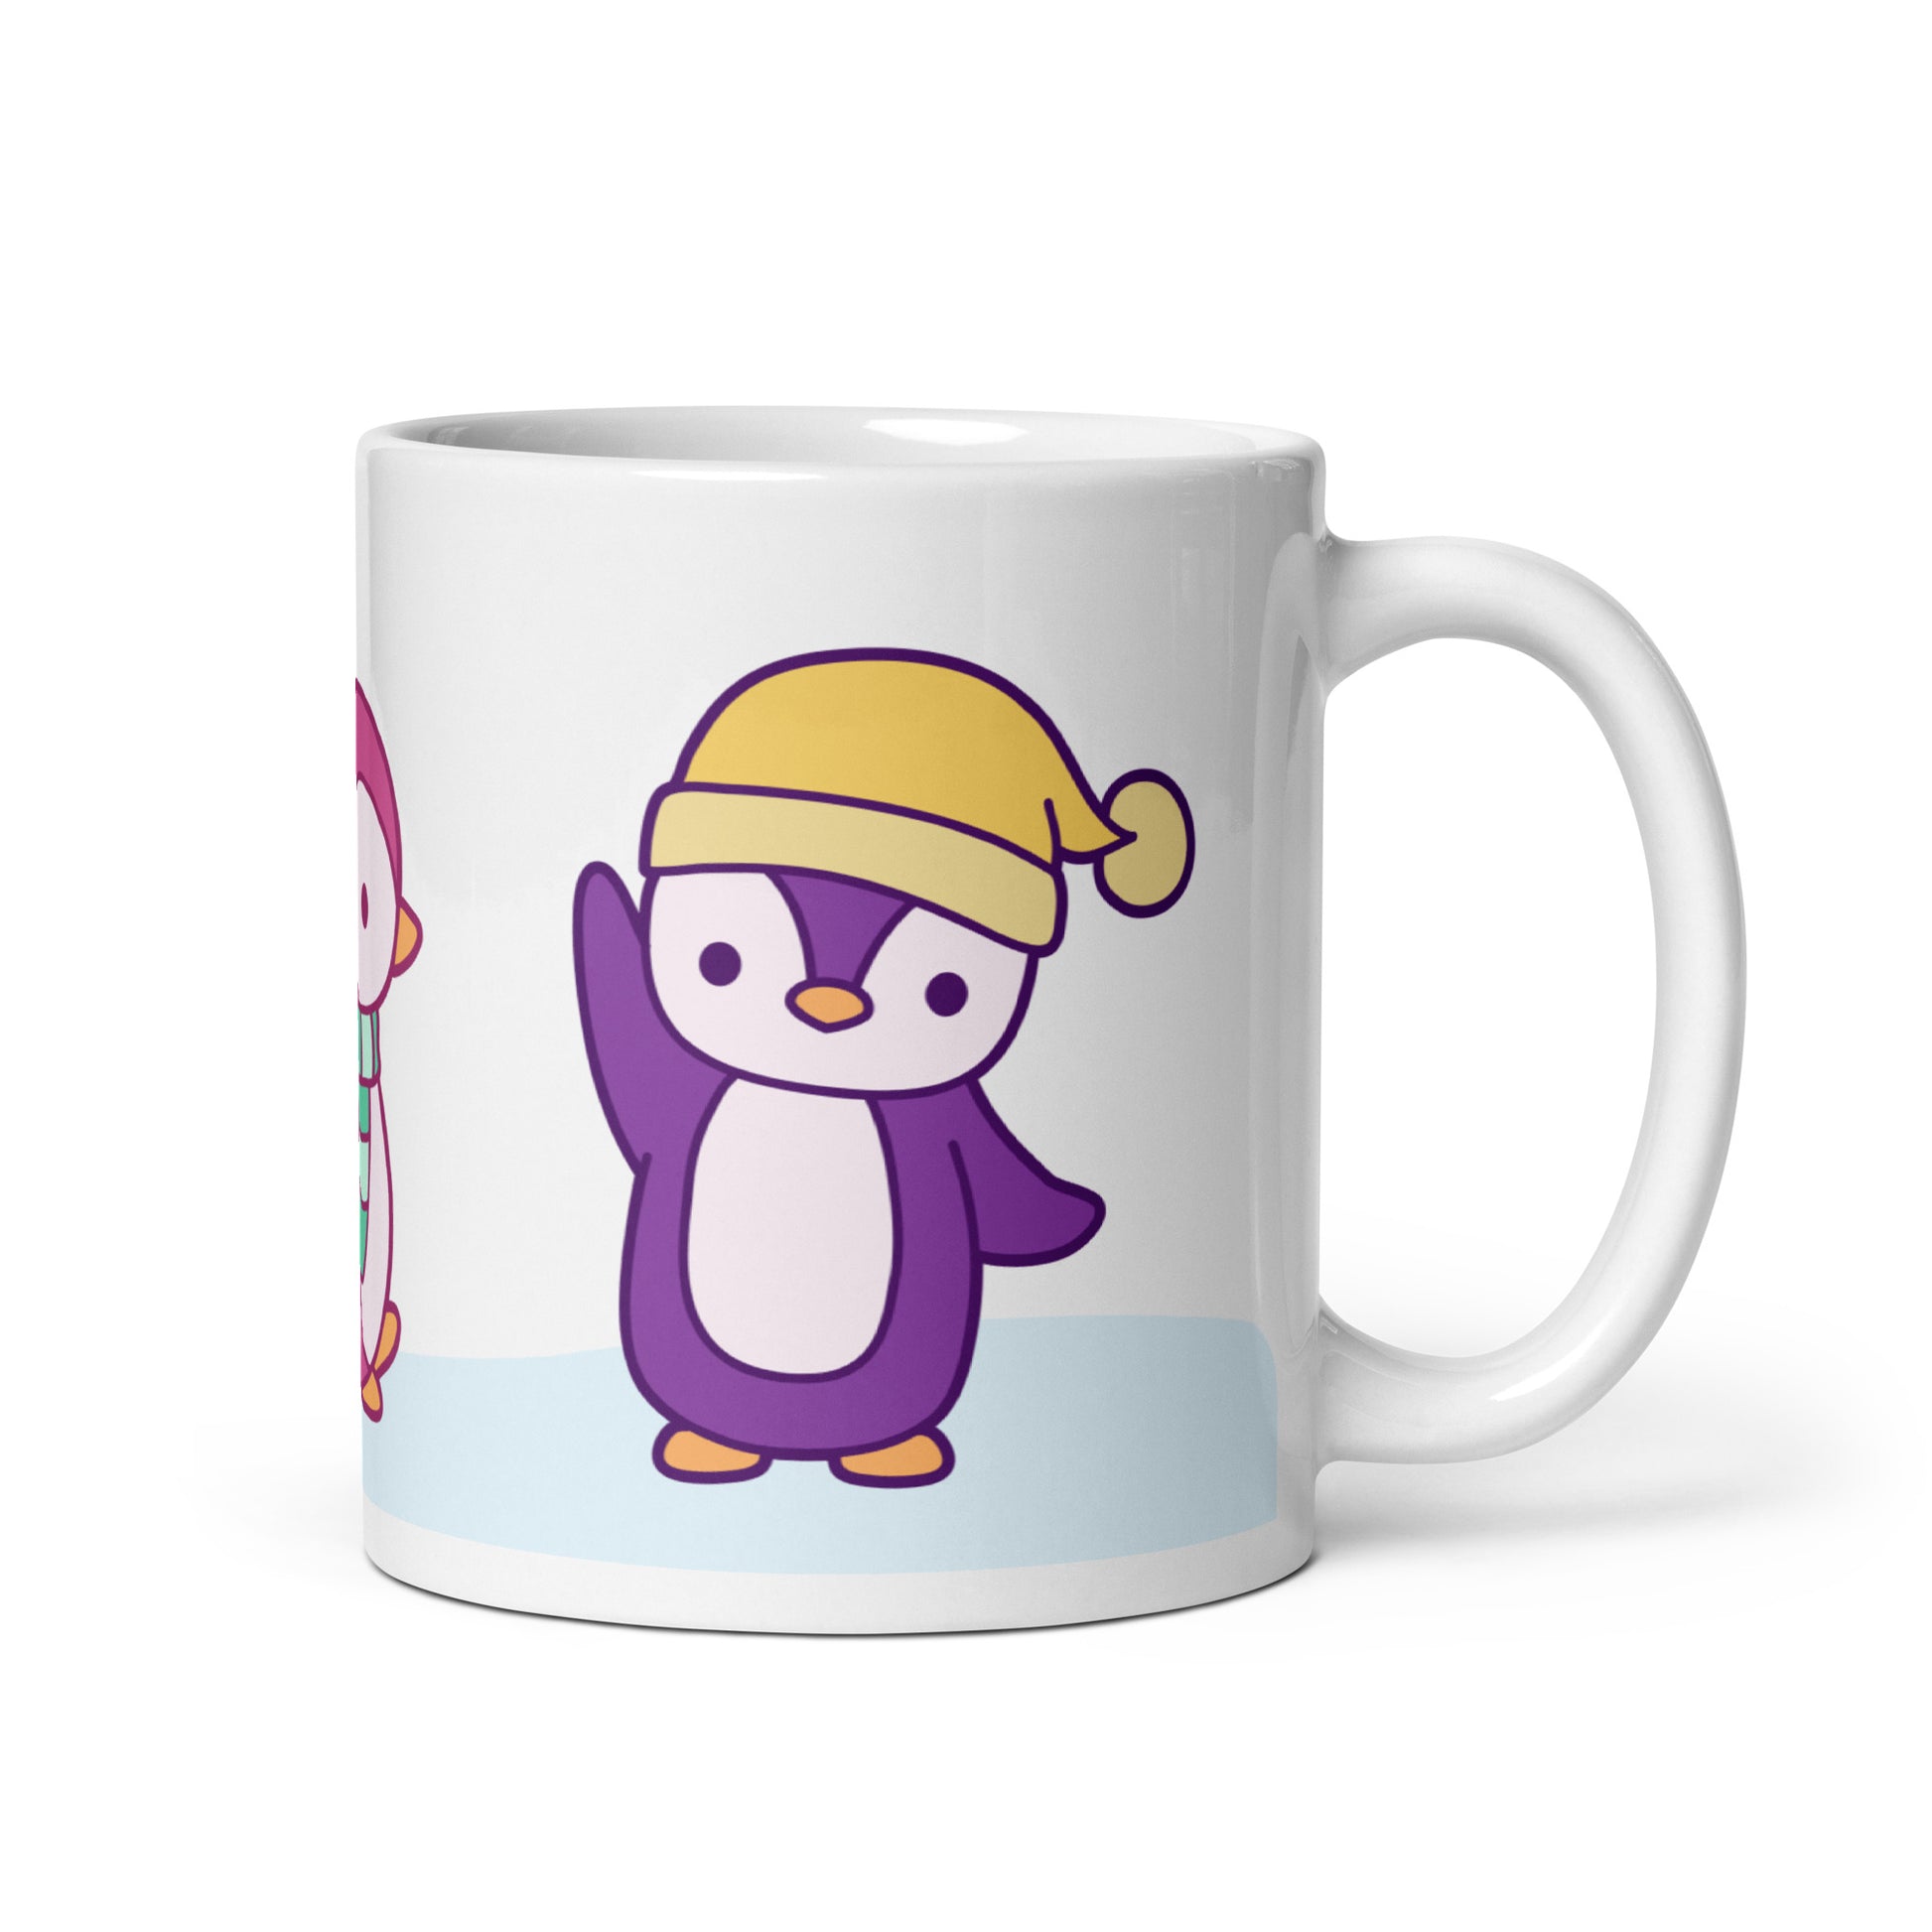 A white 11 ounce ceramic mug featuring an illustration of peguins in the snow. The primary visible penguin is purple, with a yellow hat.